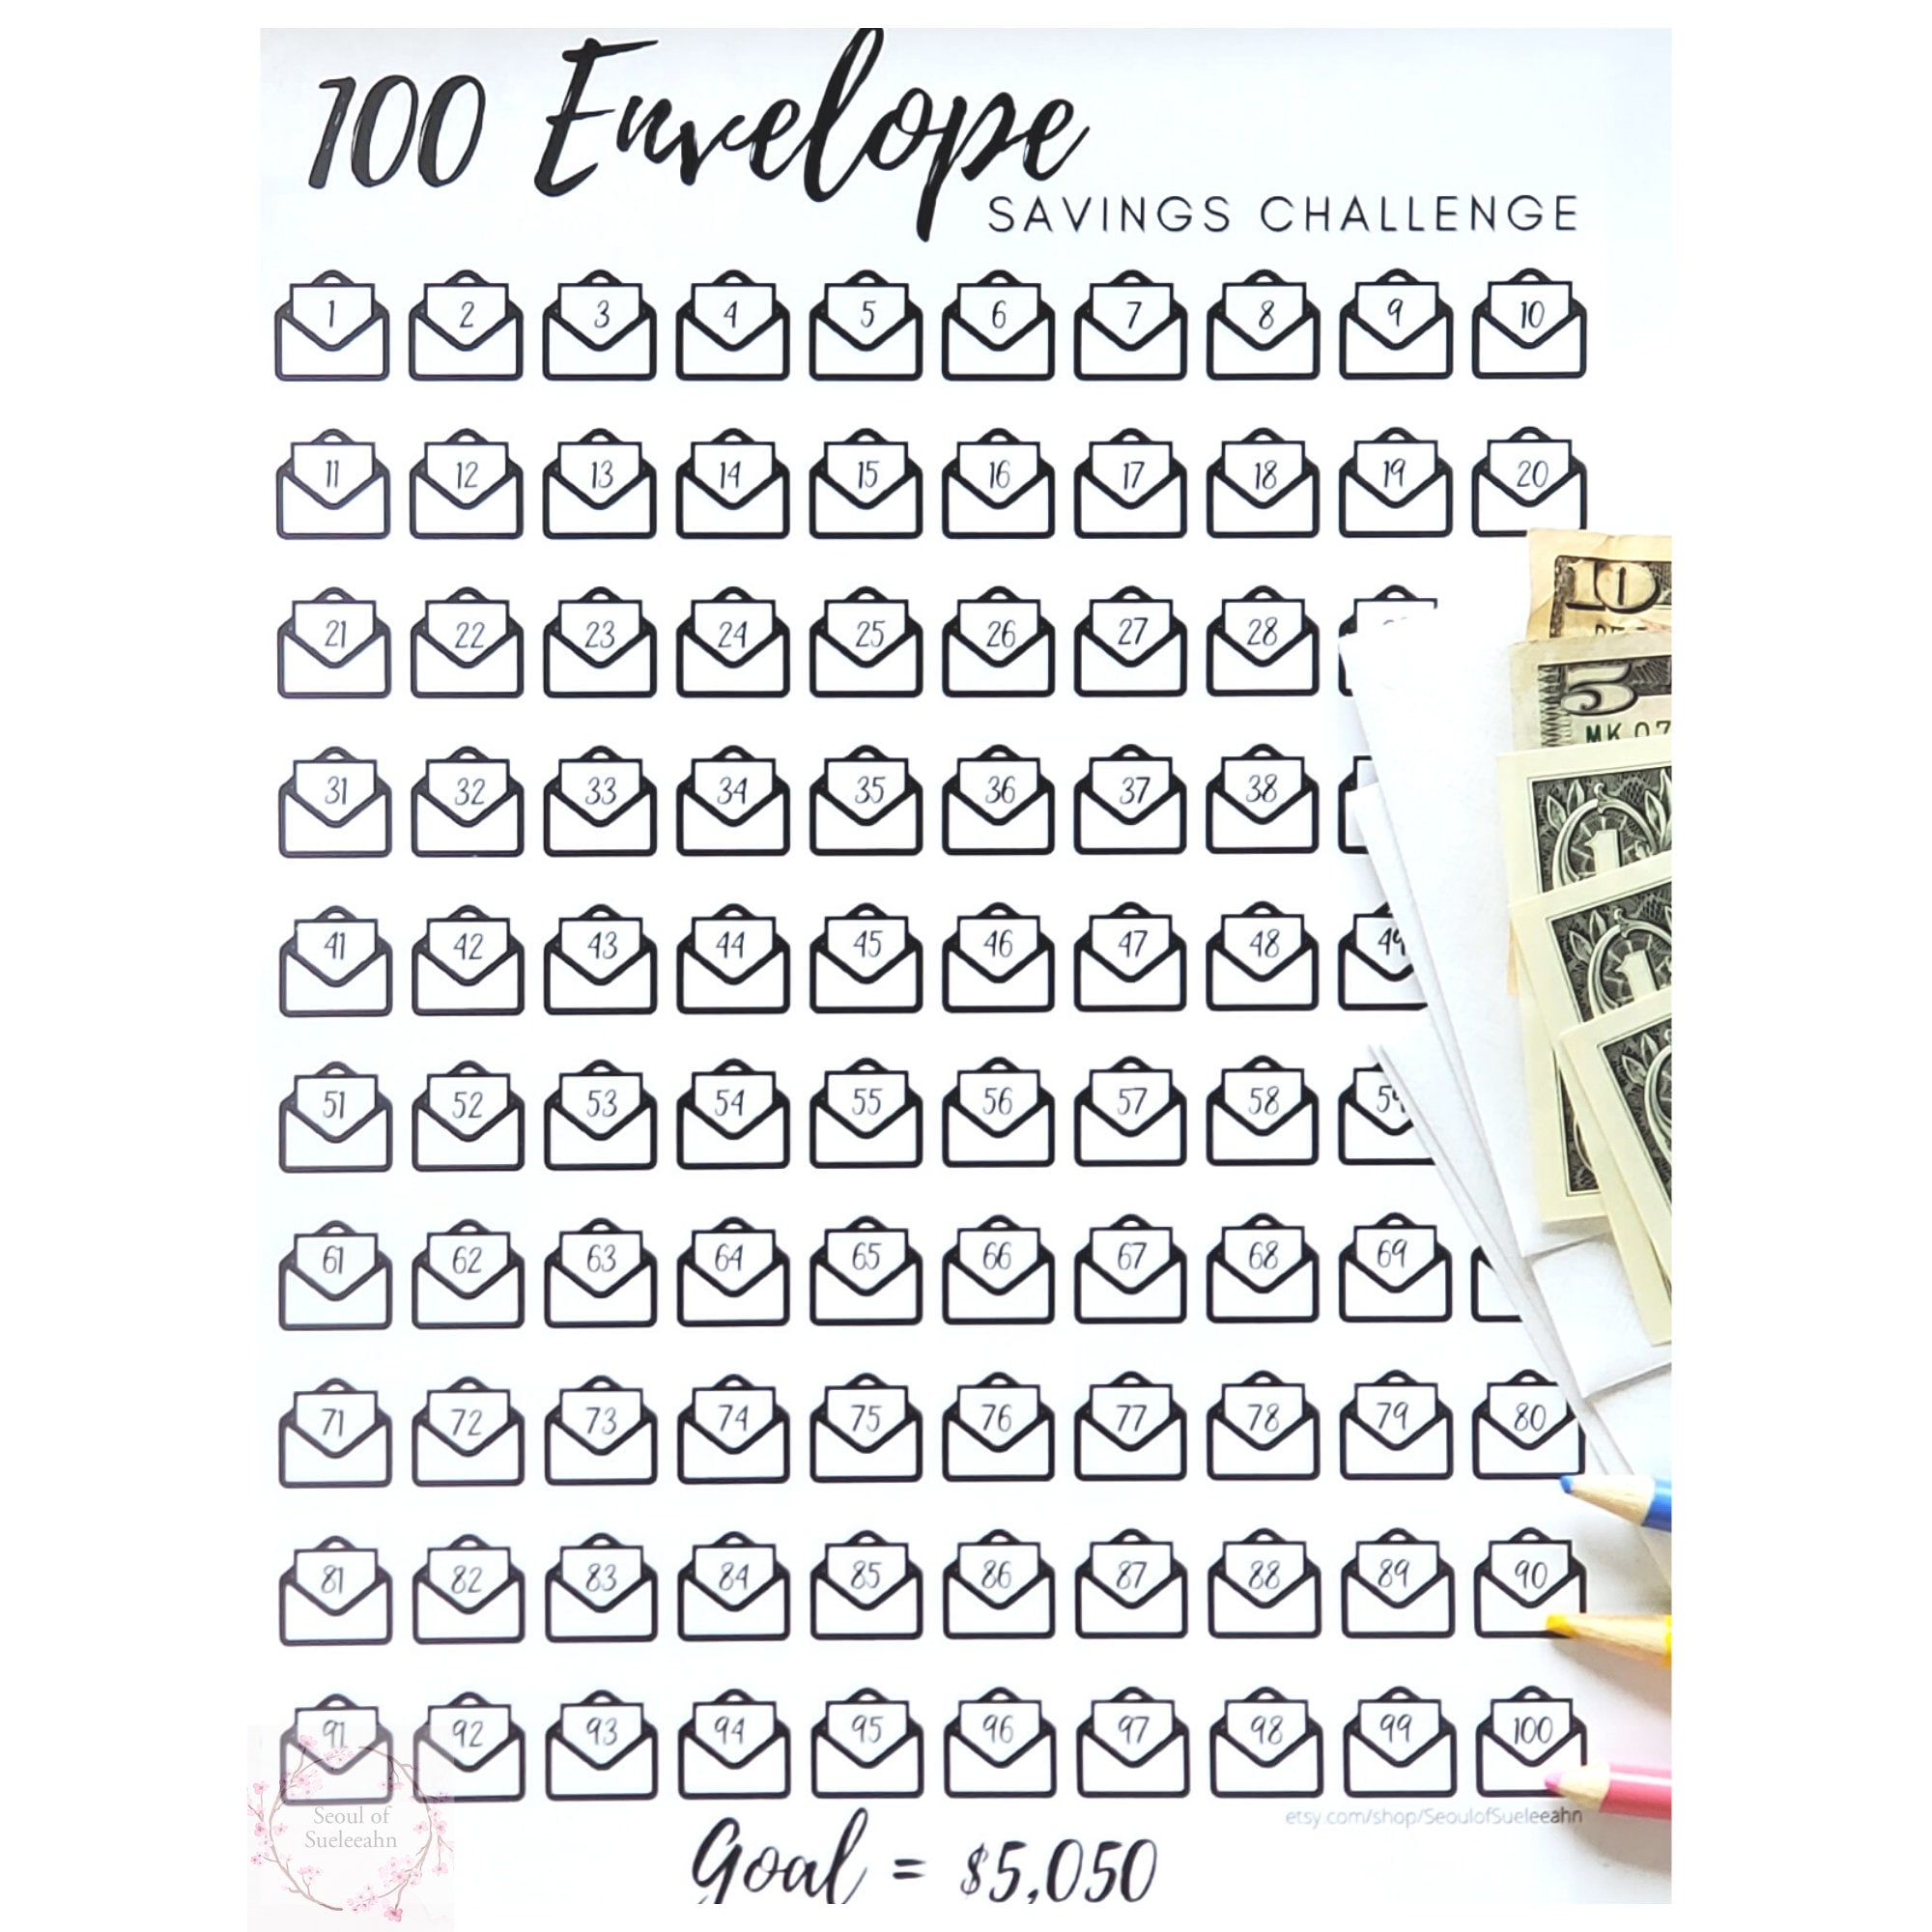 How Much Do You Save In The 100 Envelope Challenge